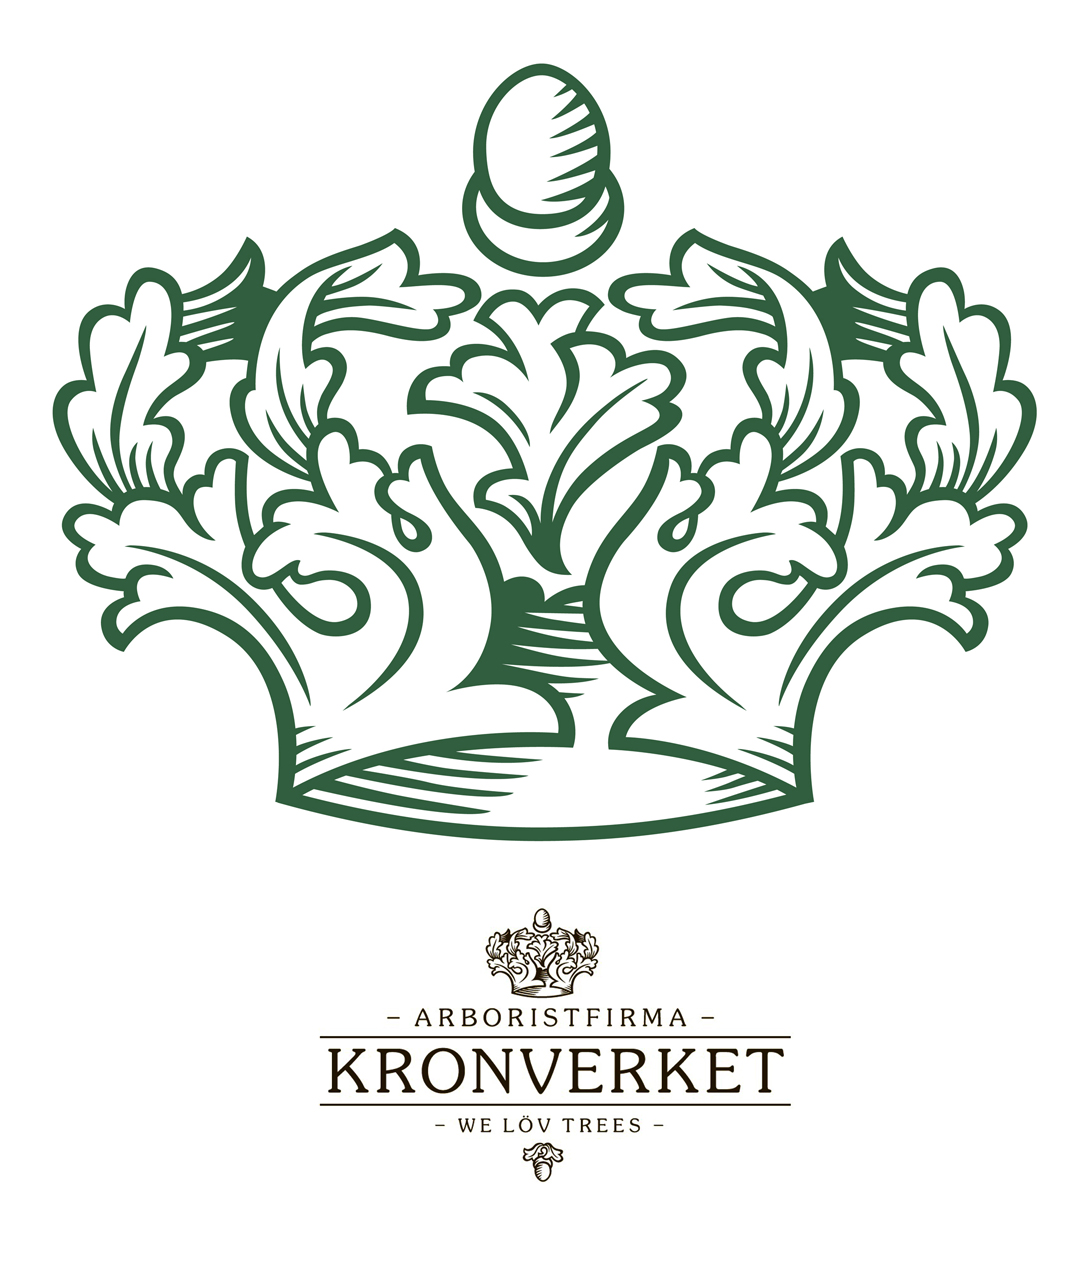 Illustration for a logo Kronverket showing a crown of leafs.